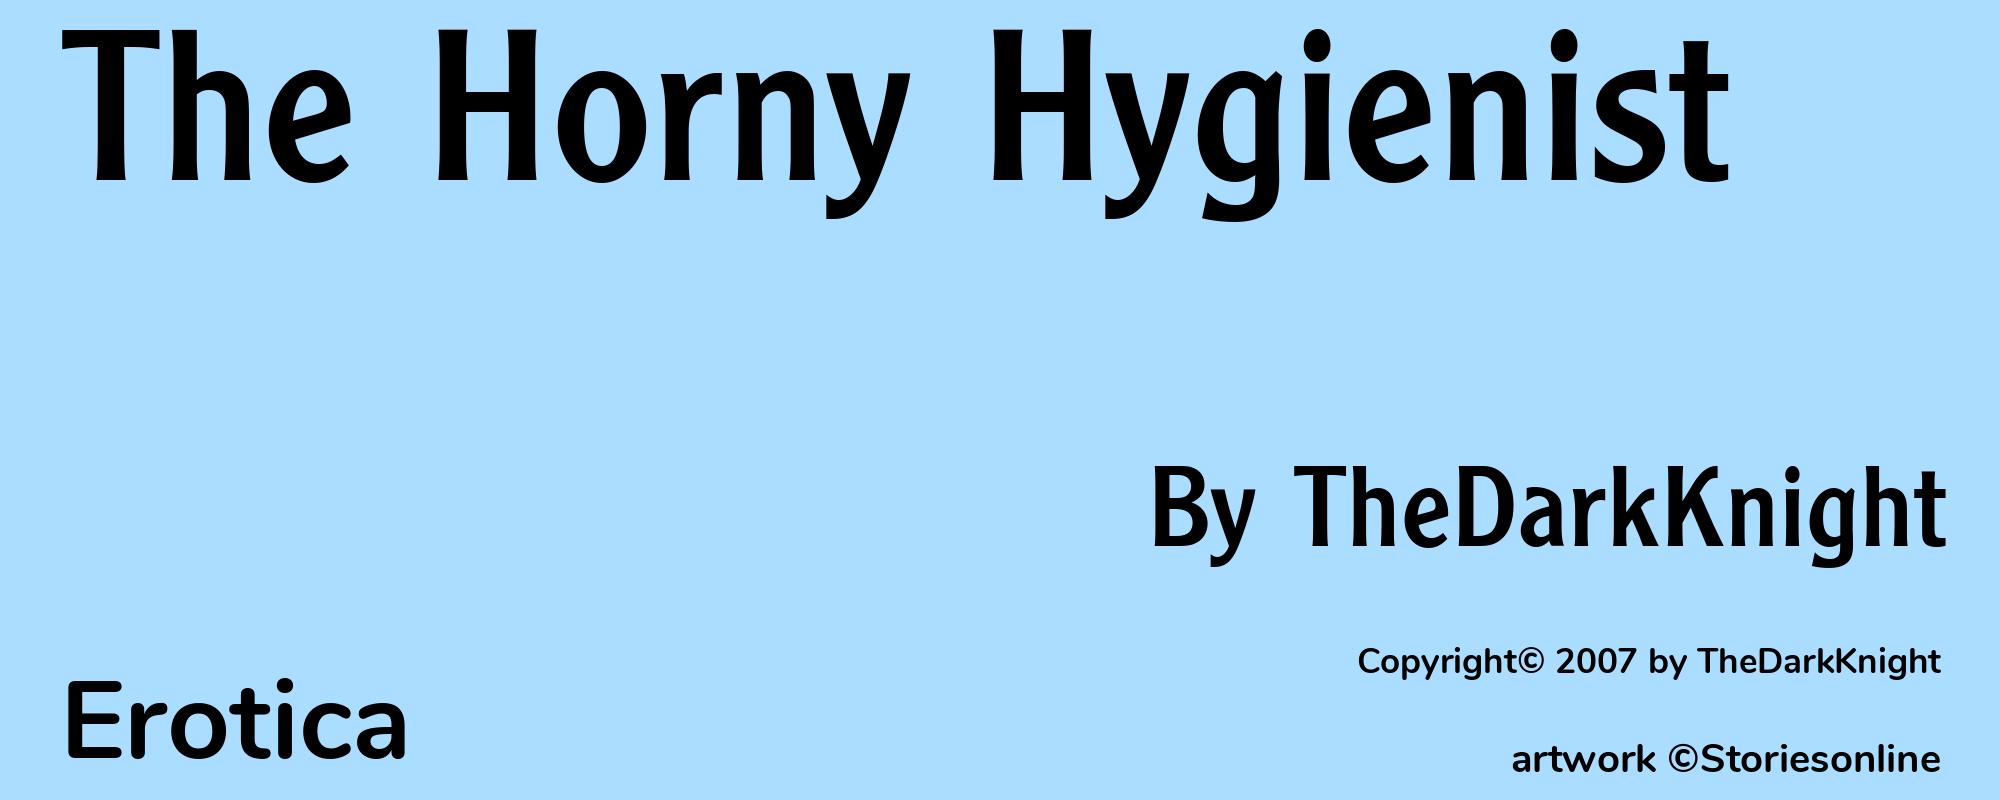 The Horny Hygienist - Cover